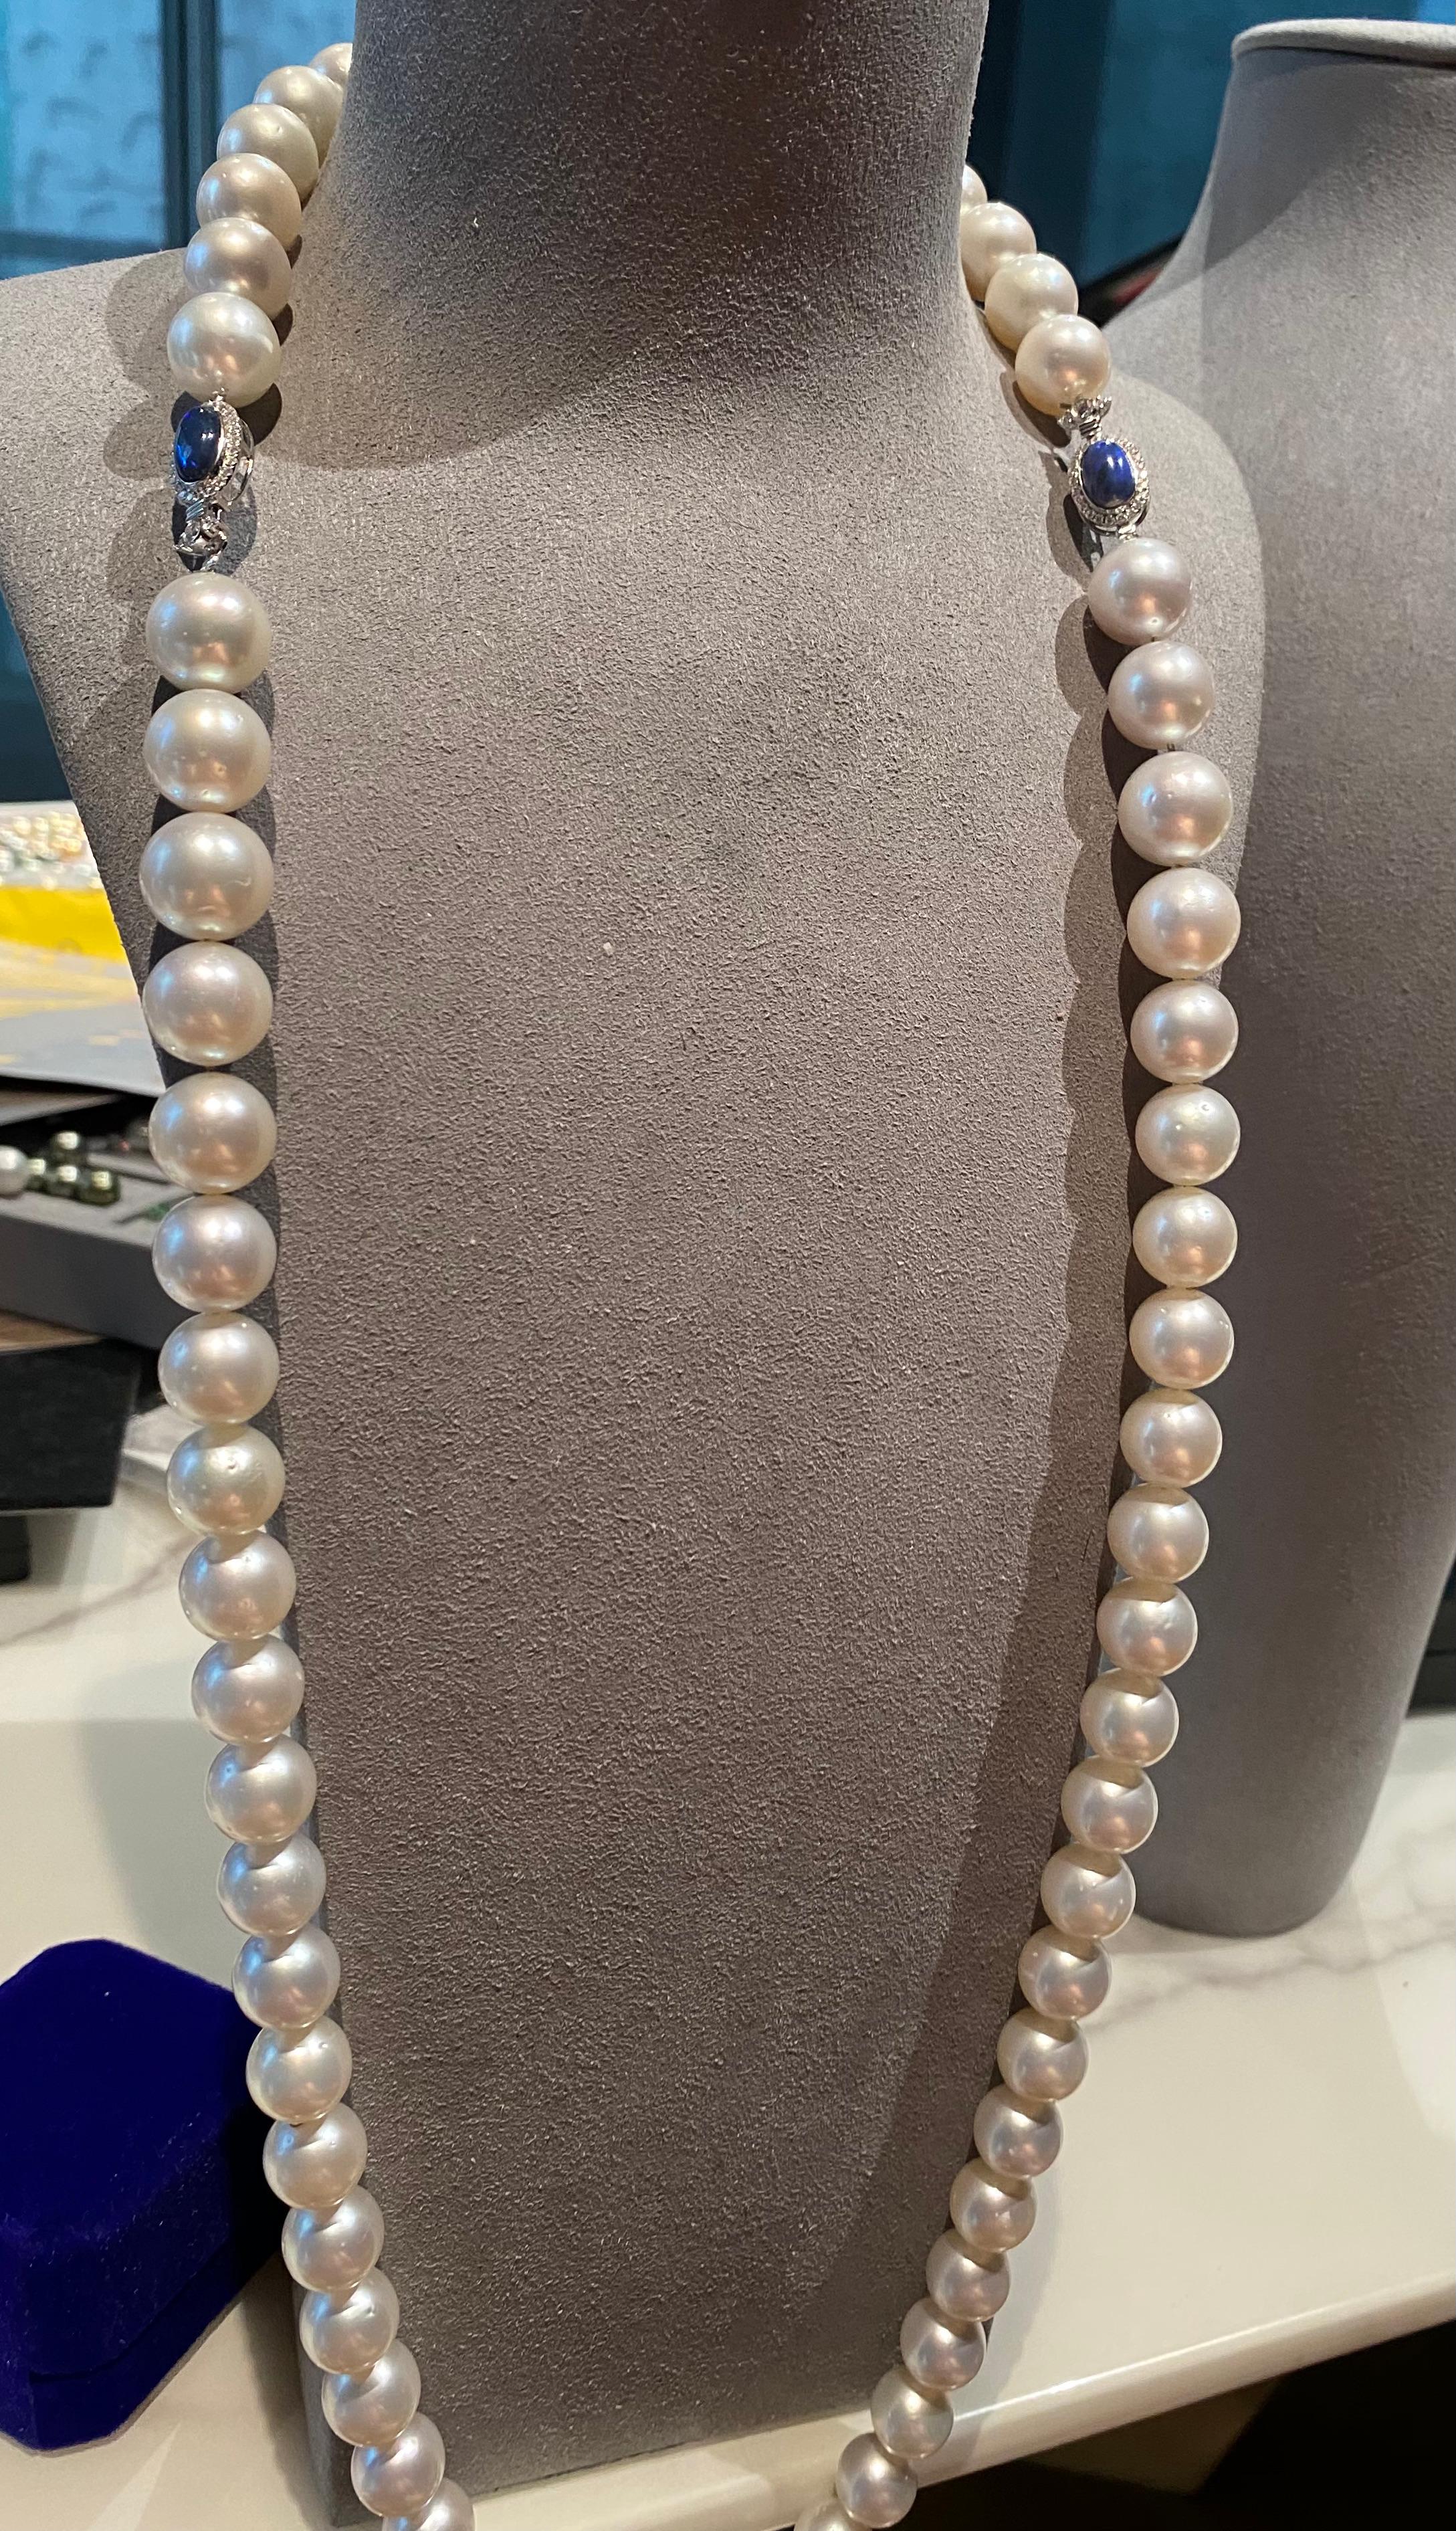 This is a premium White South Sea Pearl Necklace with 2 Australian Solid Black Opal as the Claps. The Pearl necklace consists of 66 round South Sea Pearls, this necklace can be worn in many different ways as there are 2 separated Opal and Diamond